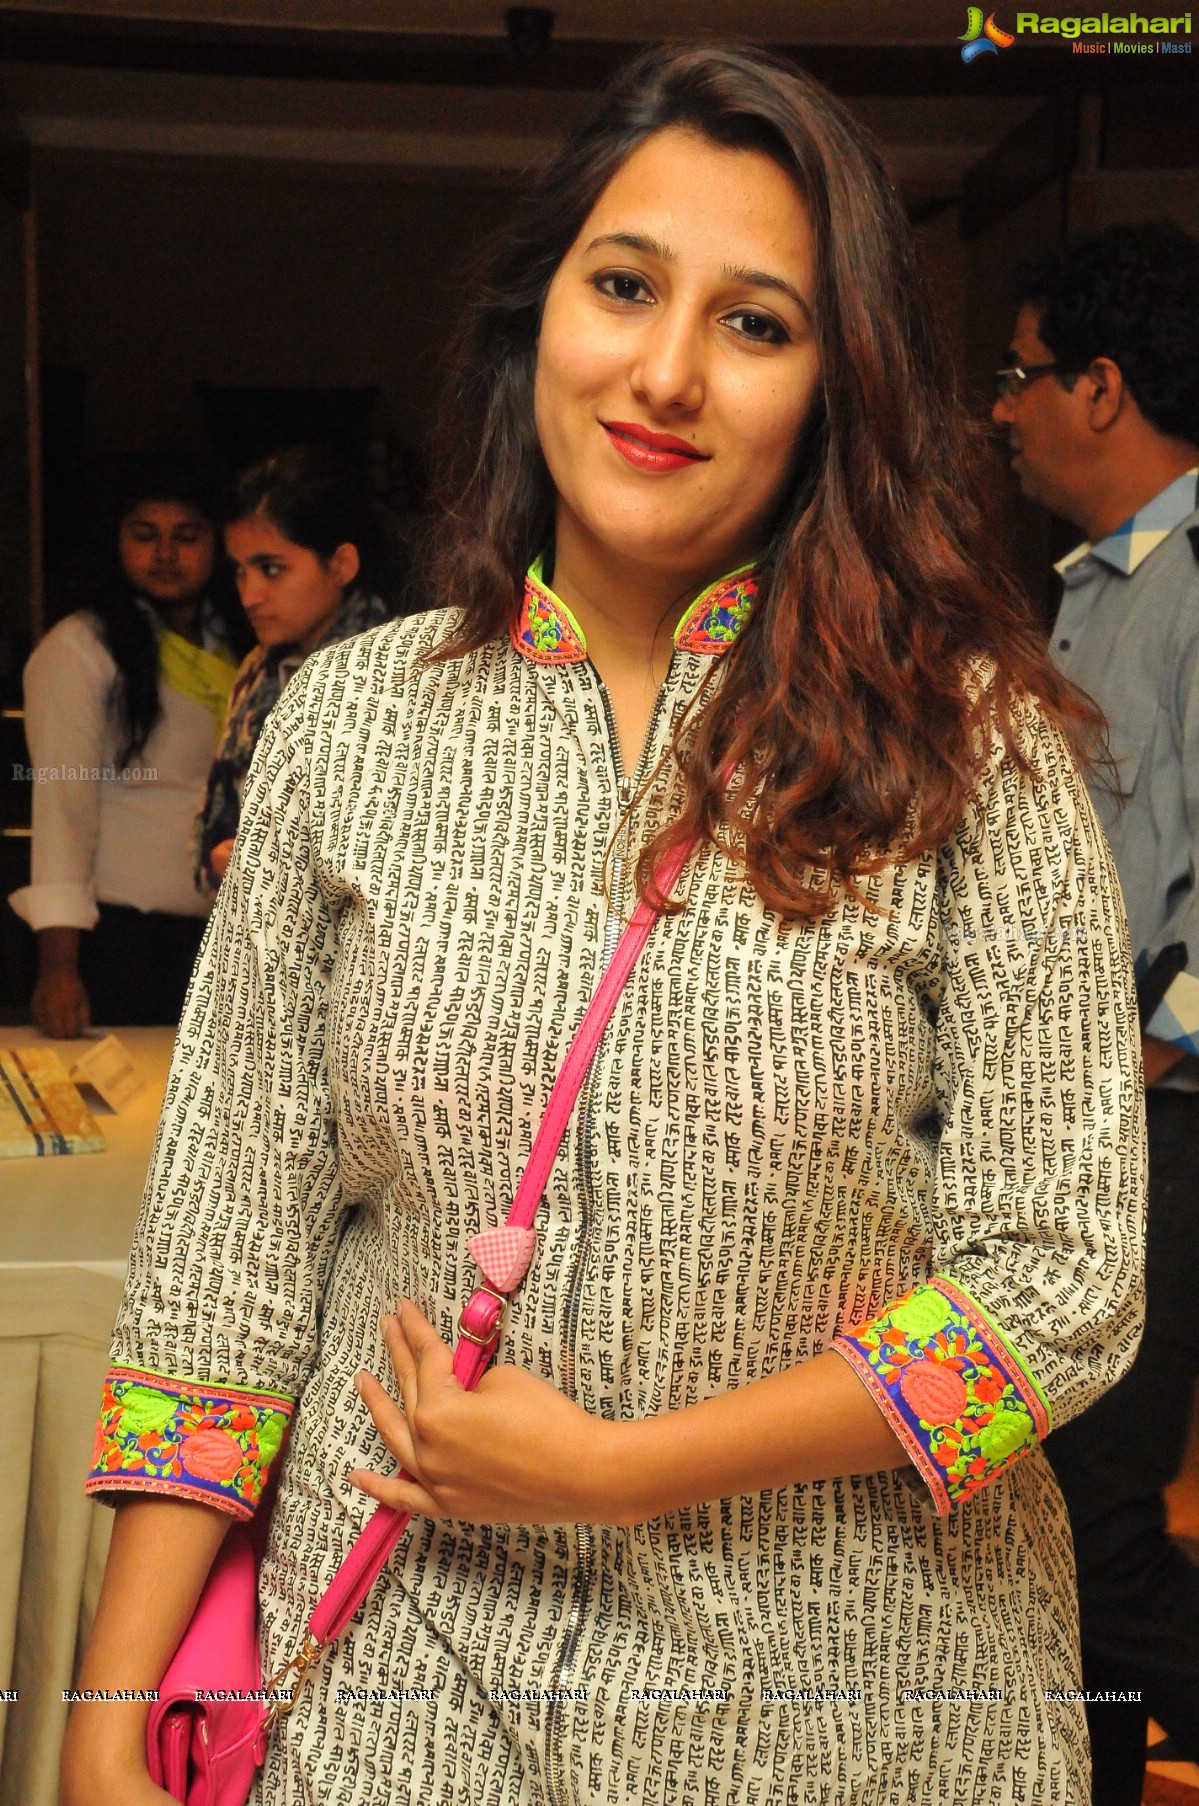 Akritti Elite 'Traditions and Fashions' Exhibition, Hyderabad